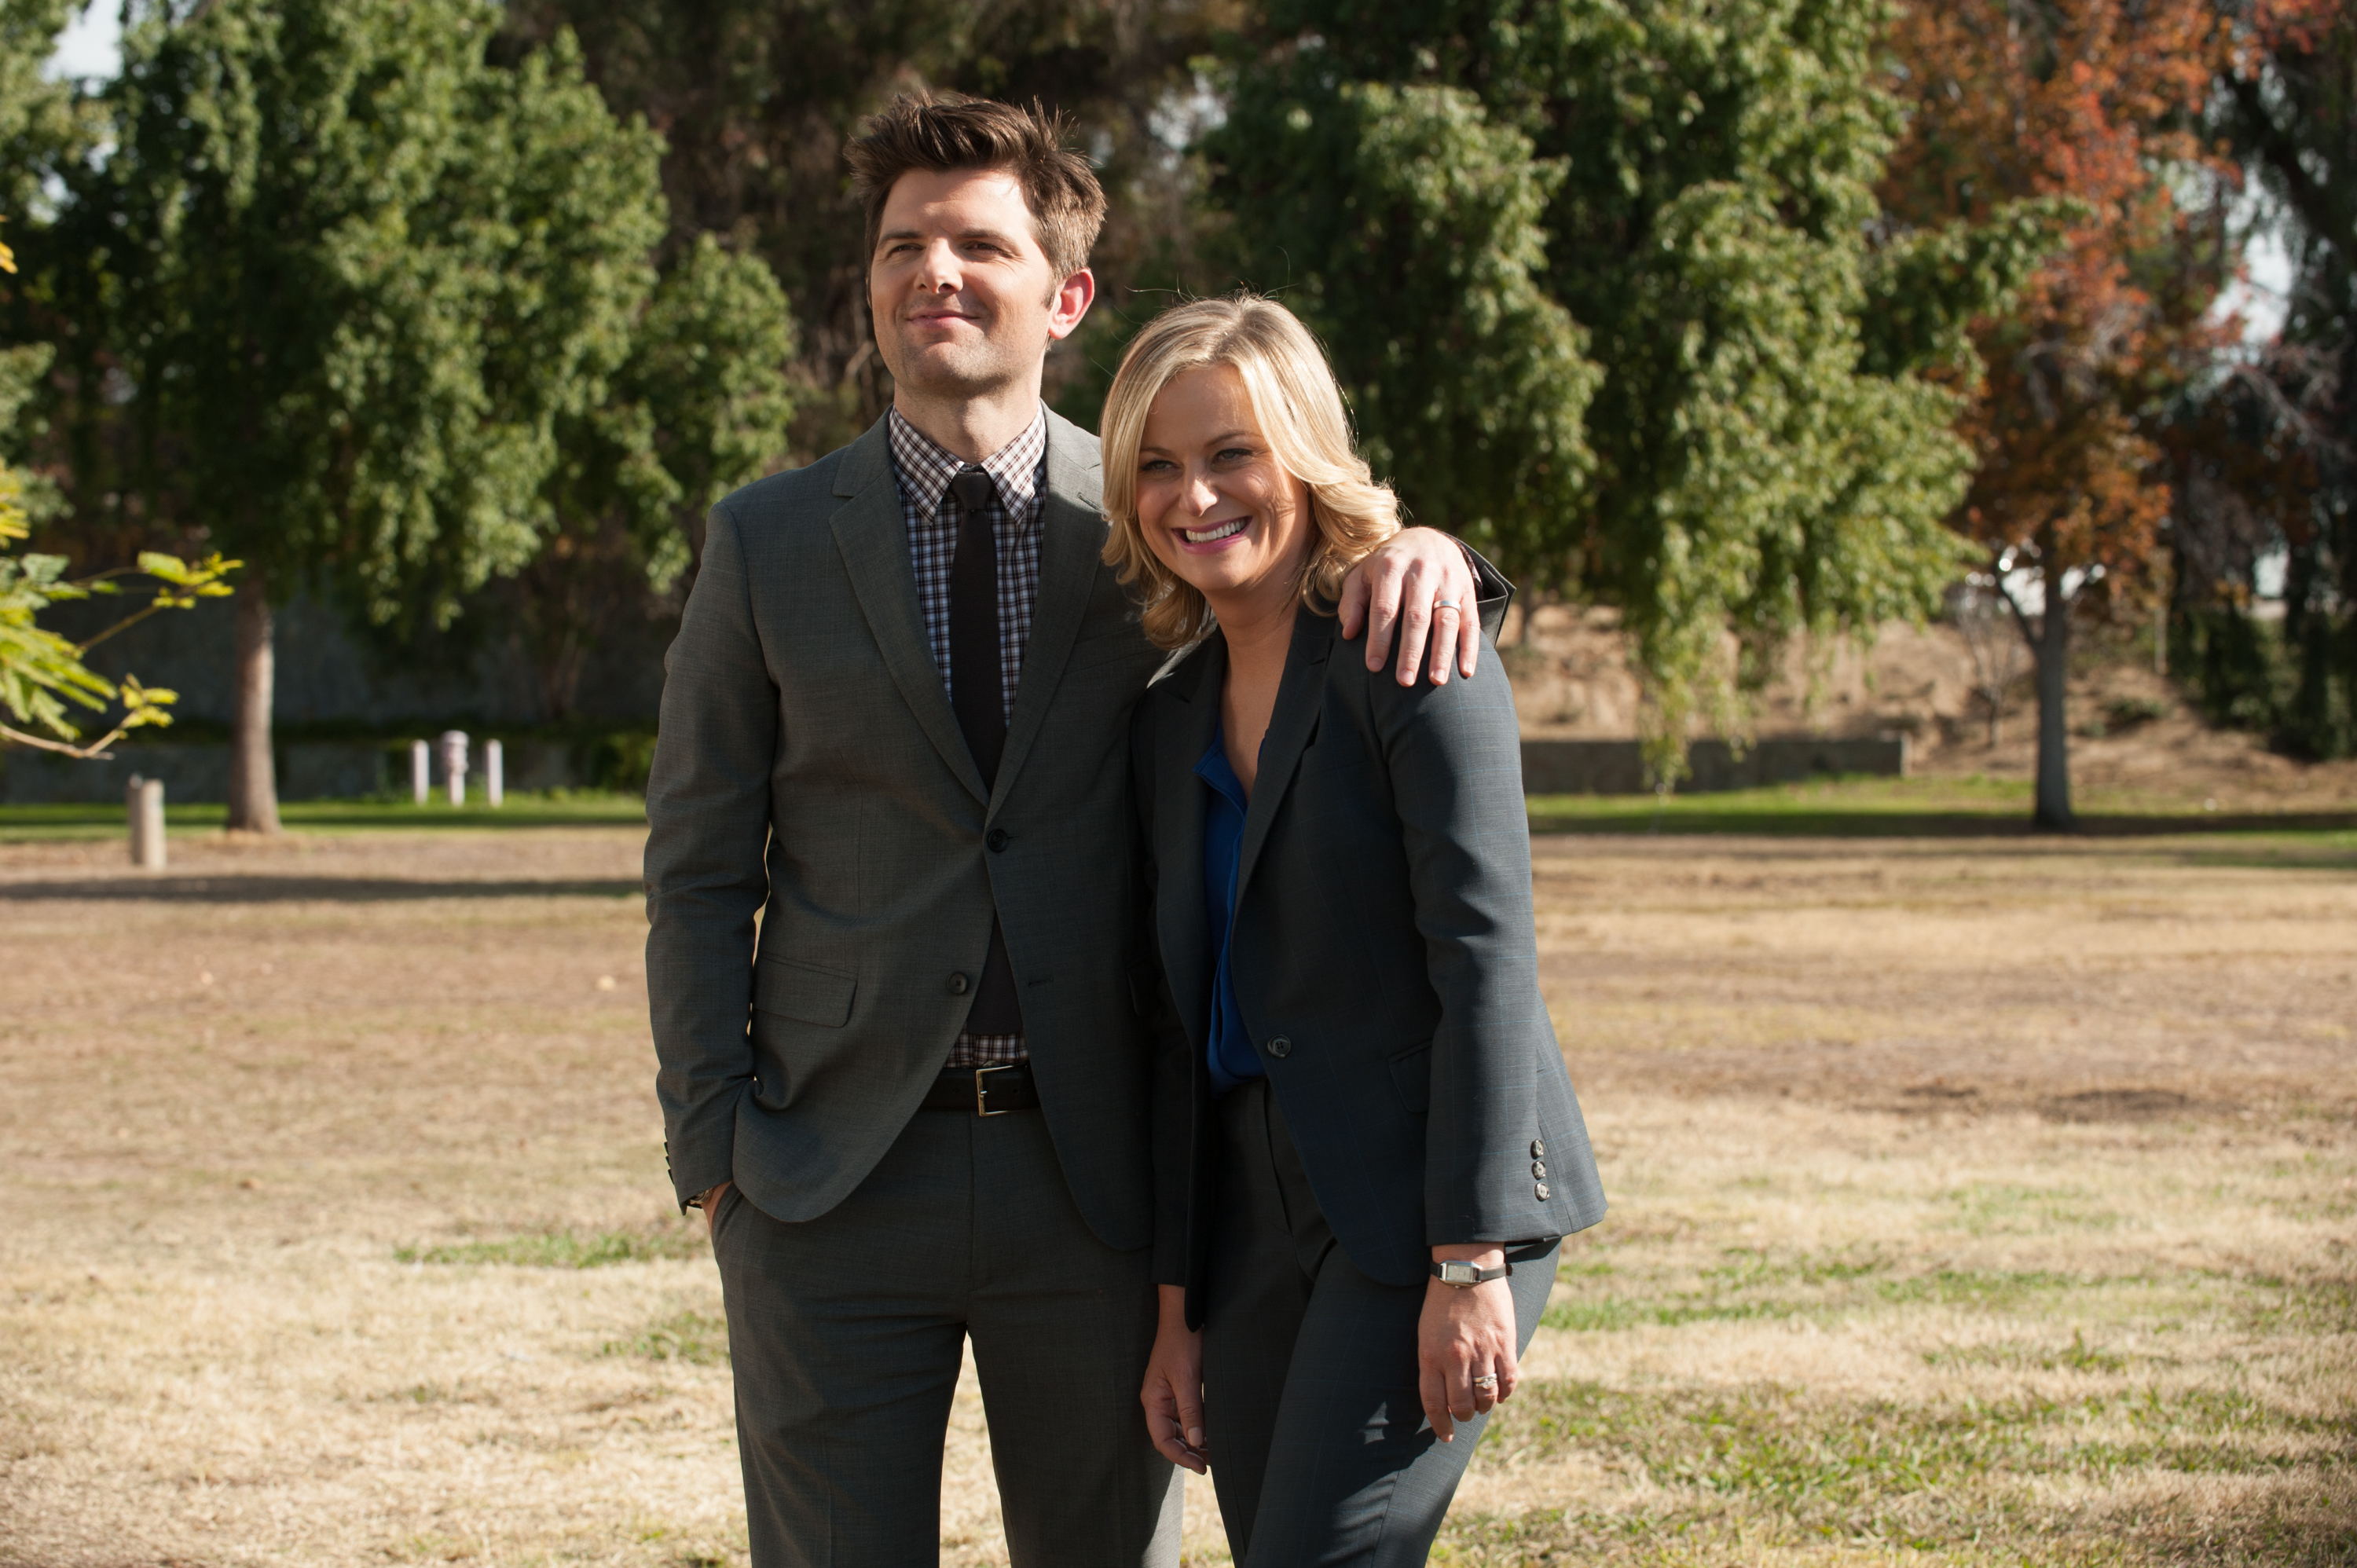 Leslie Knope and Ben Wyatt smiling together in business attire outdoors